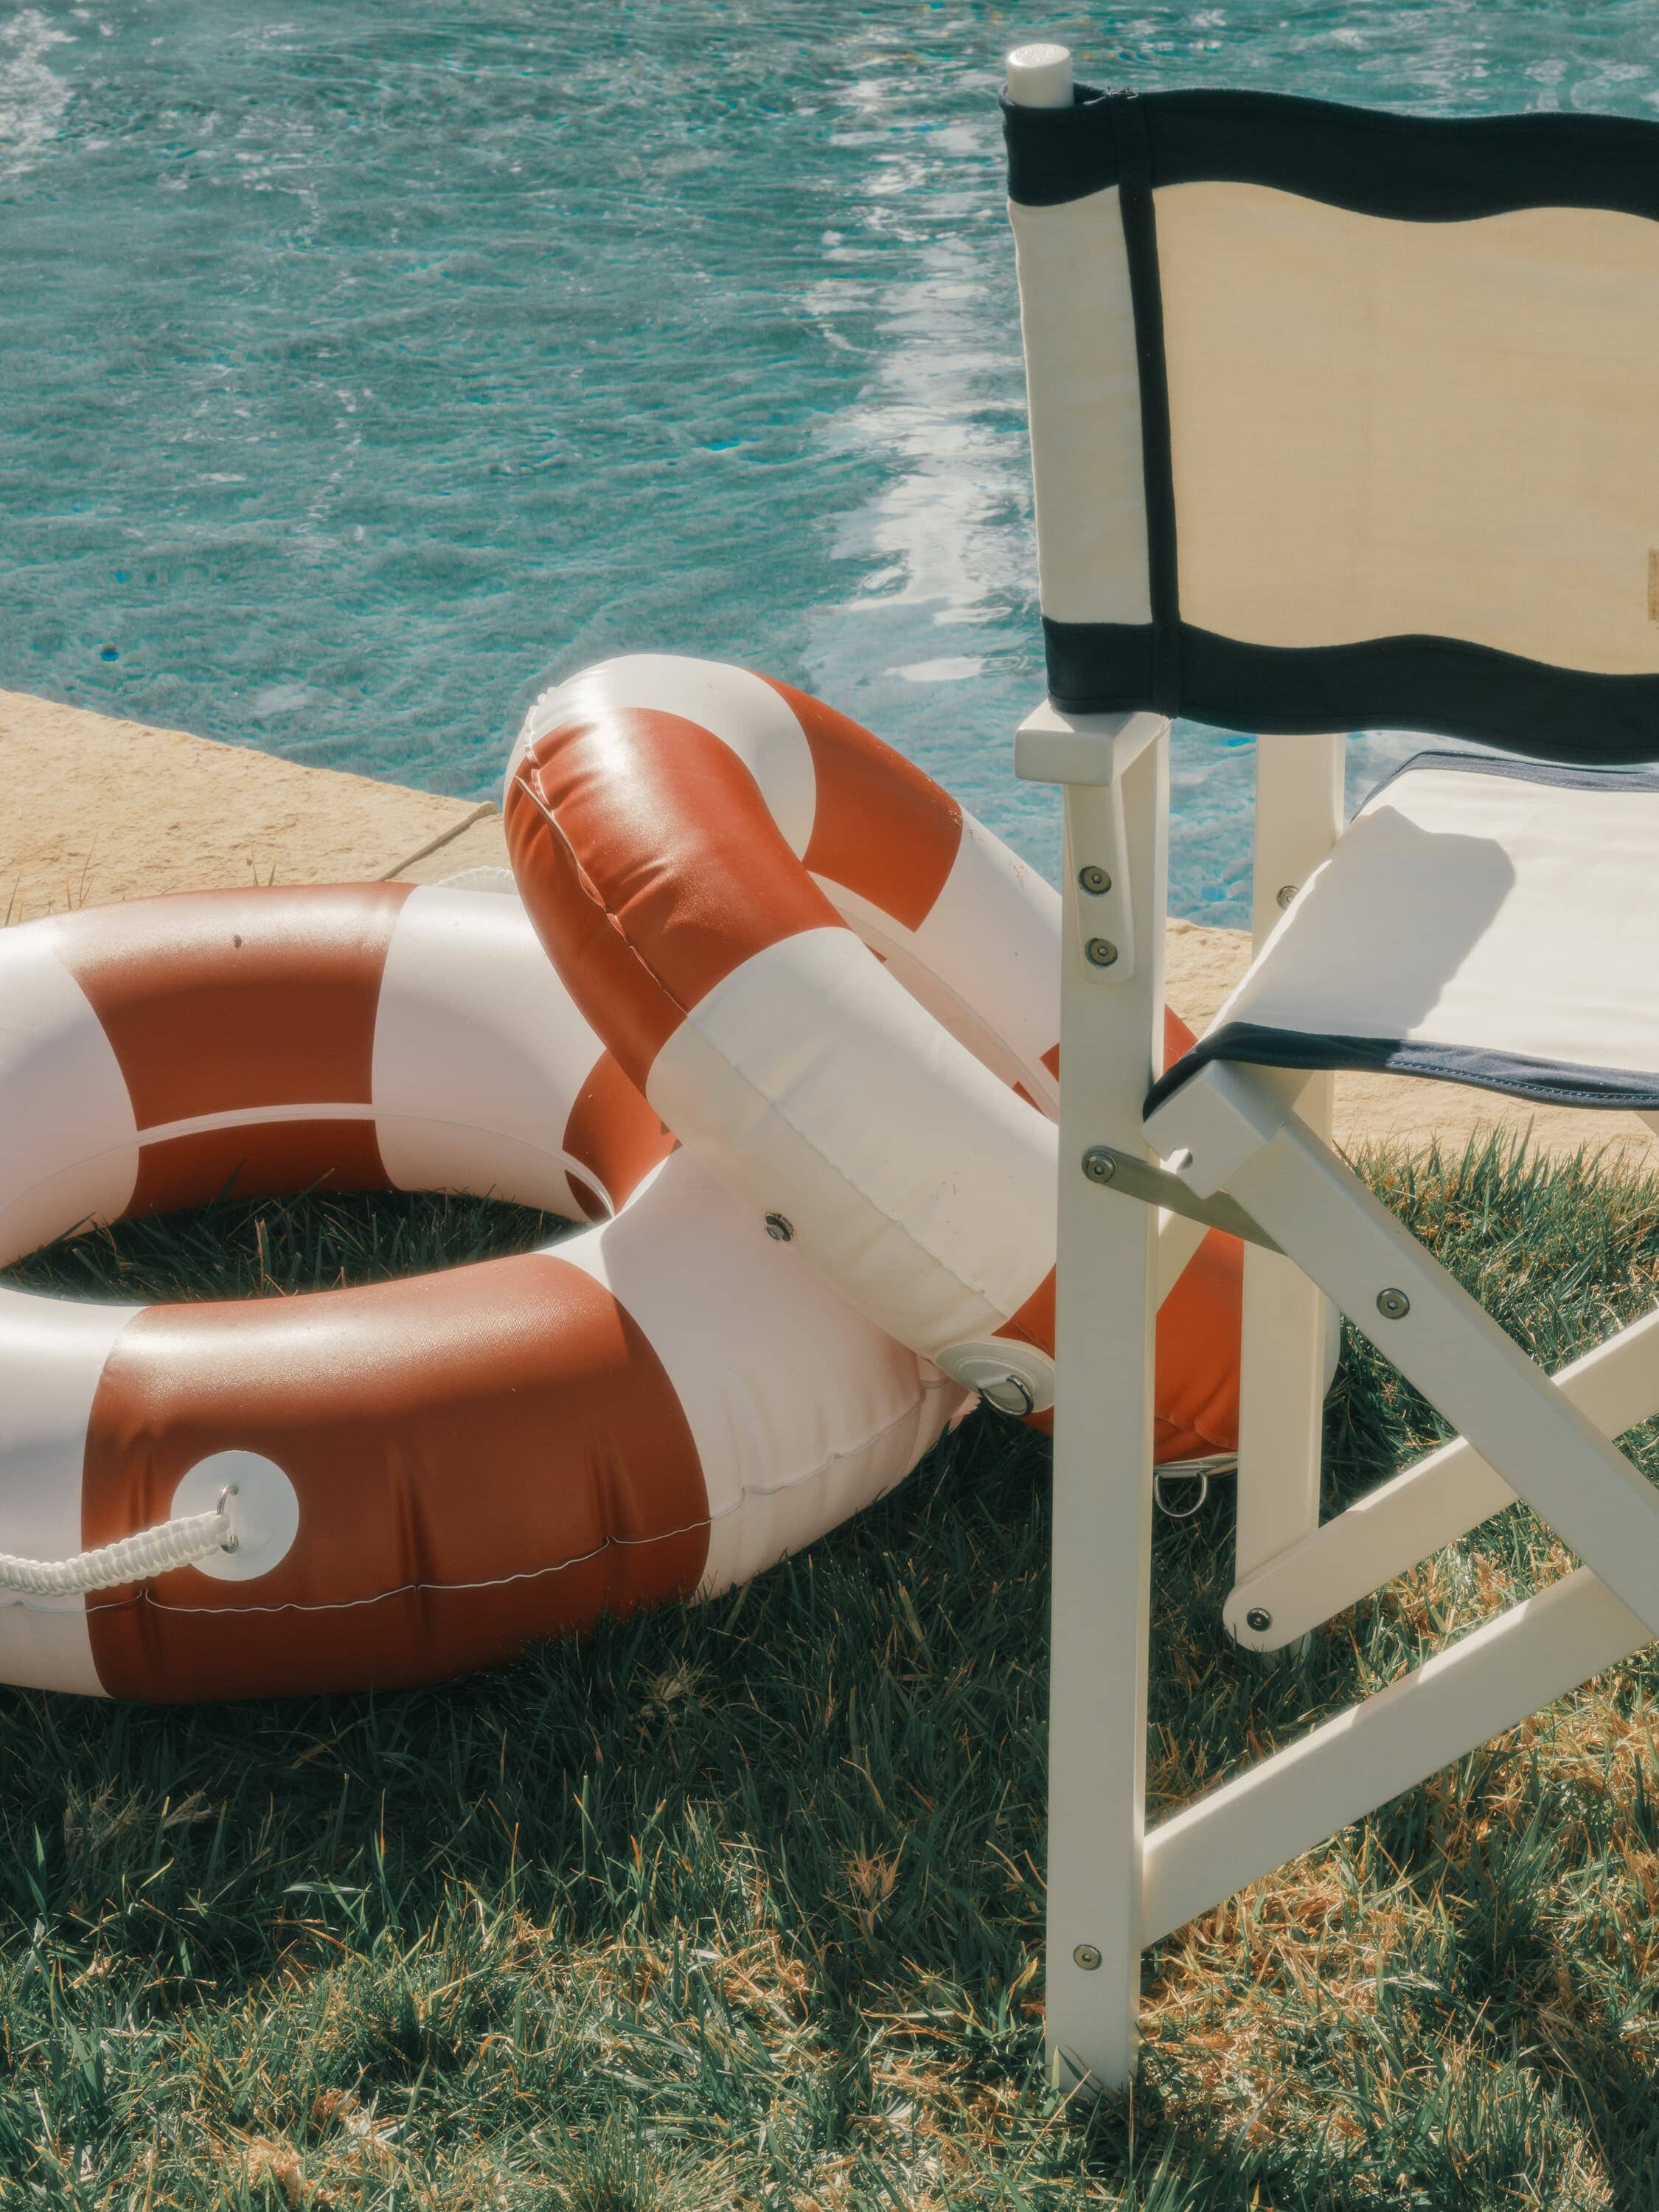 pool rings stacked up next to a chair